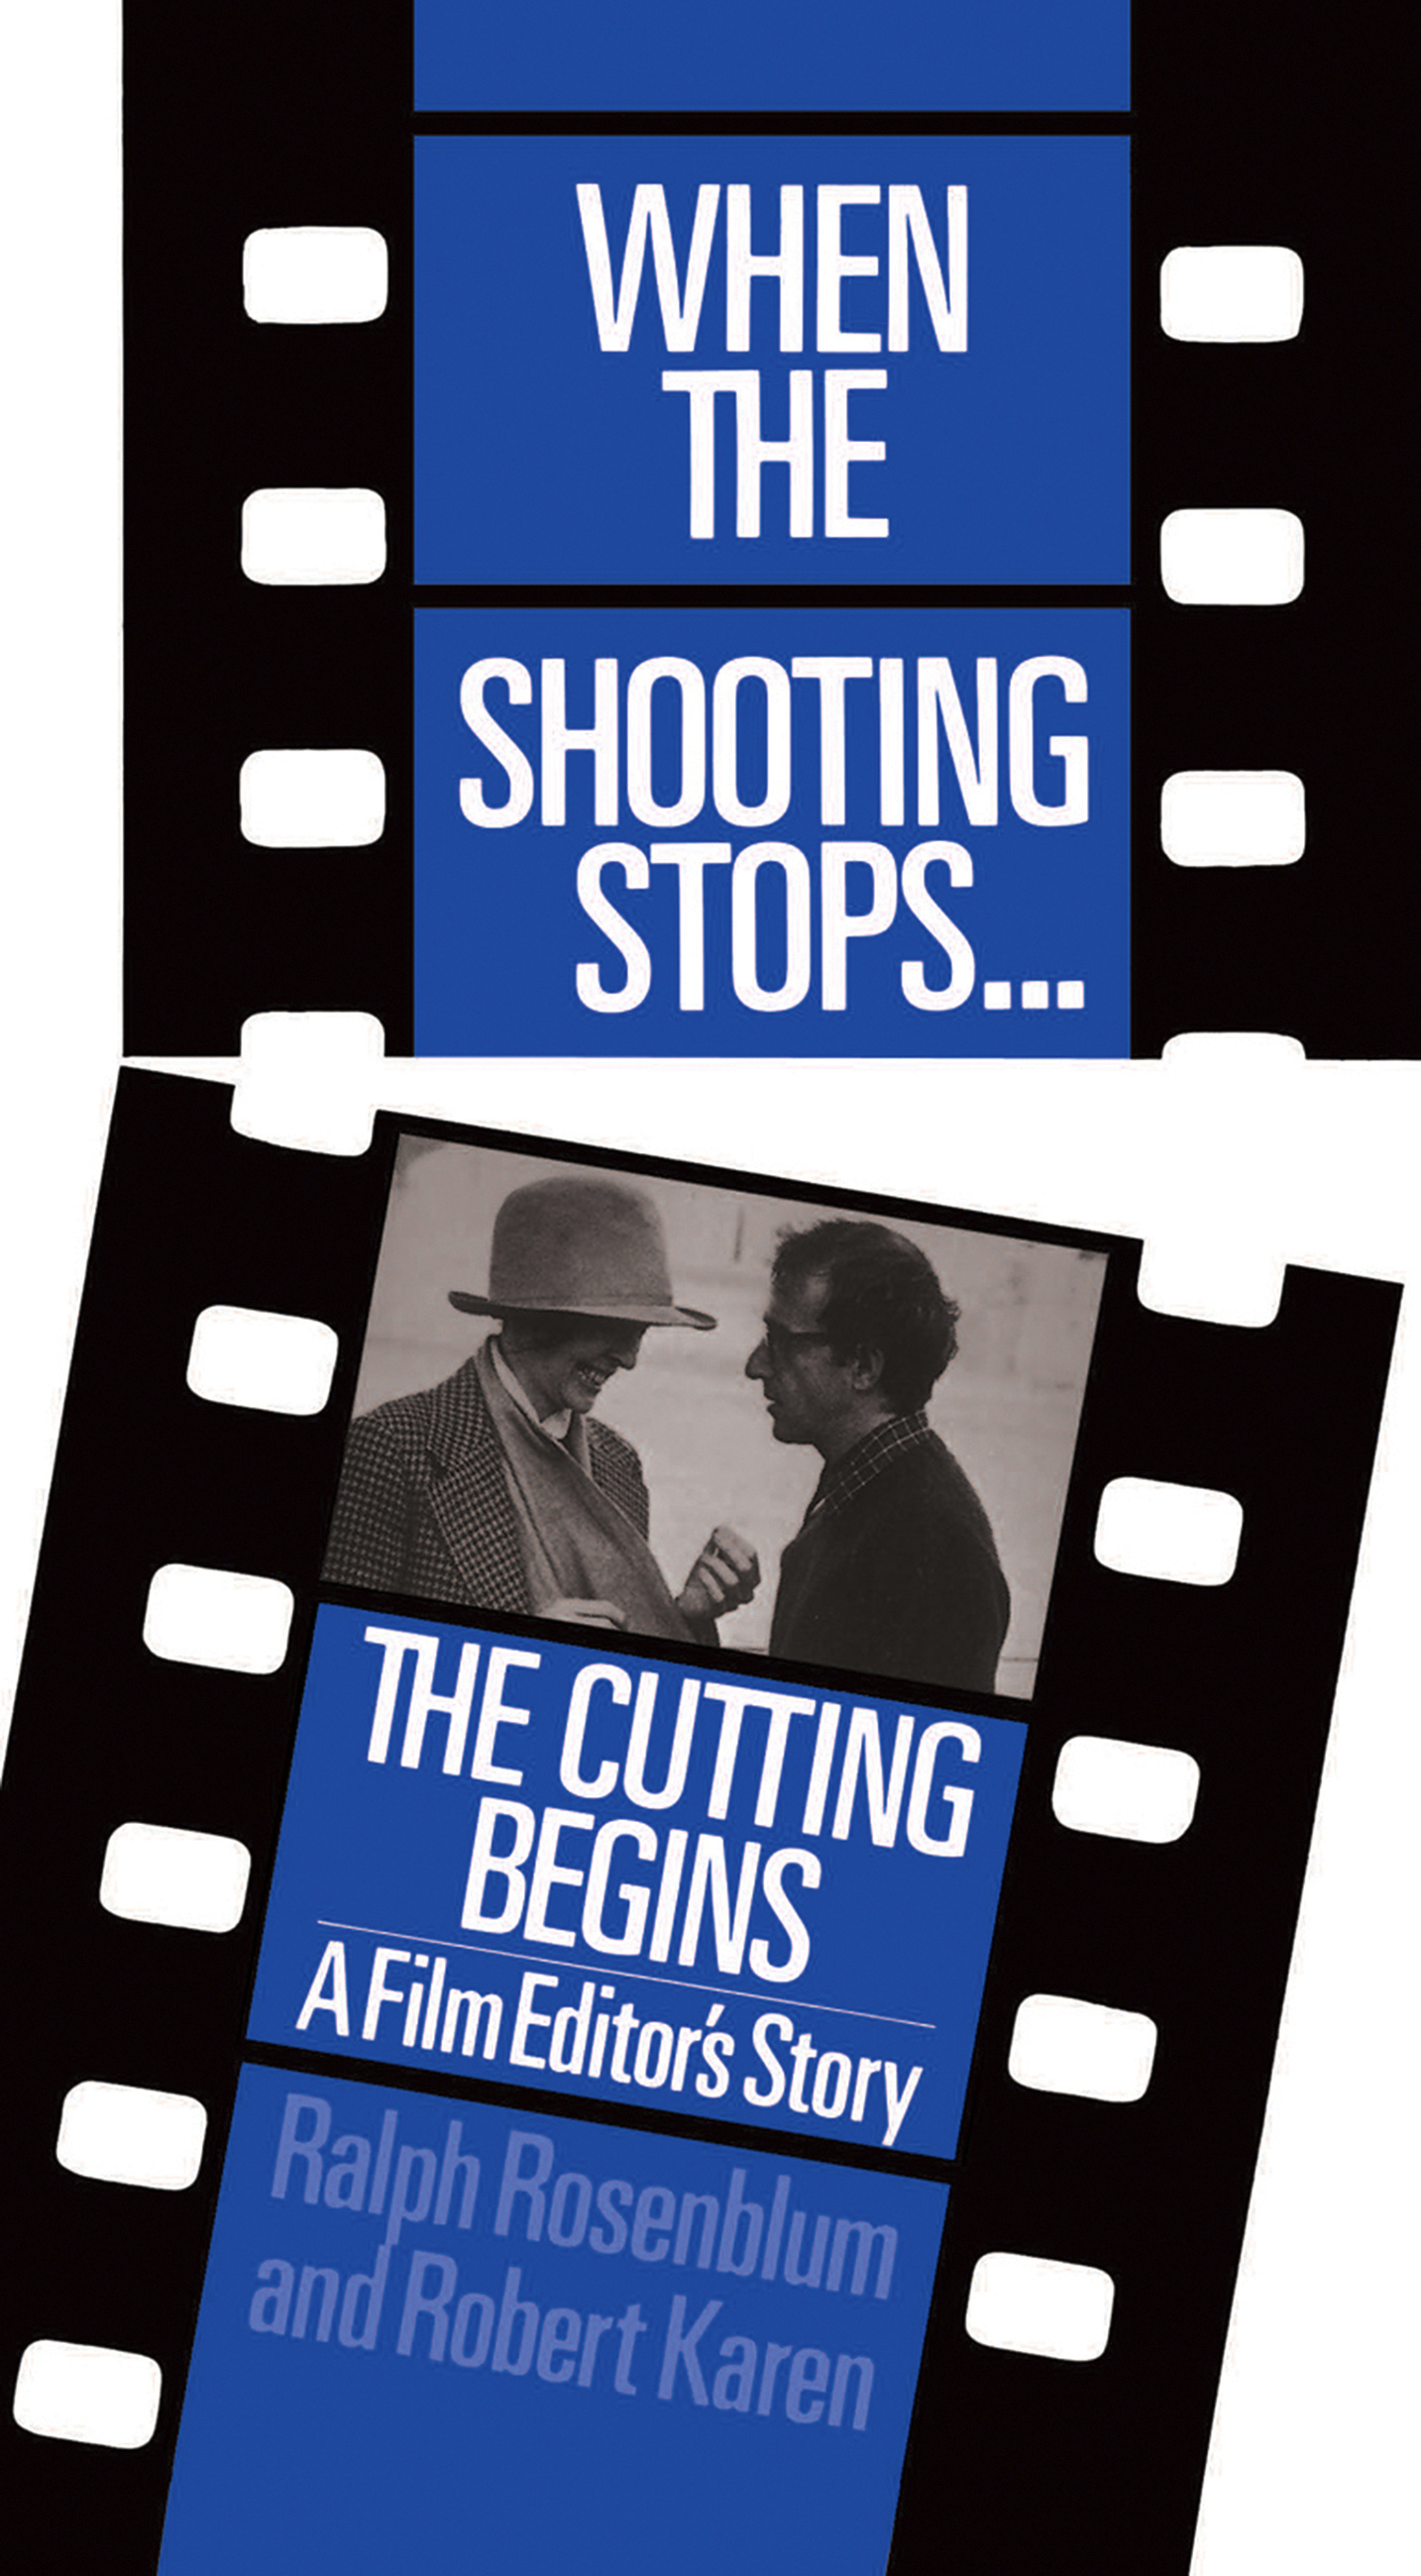 When The Shooting Stops The Cutting Begins by Ralph Rosenblum